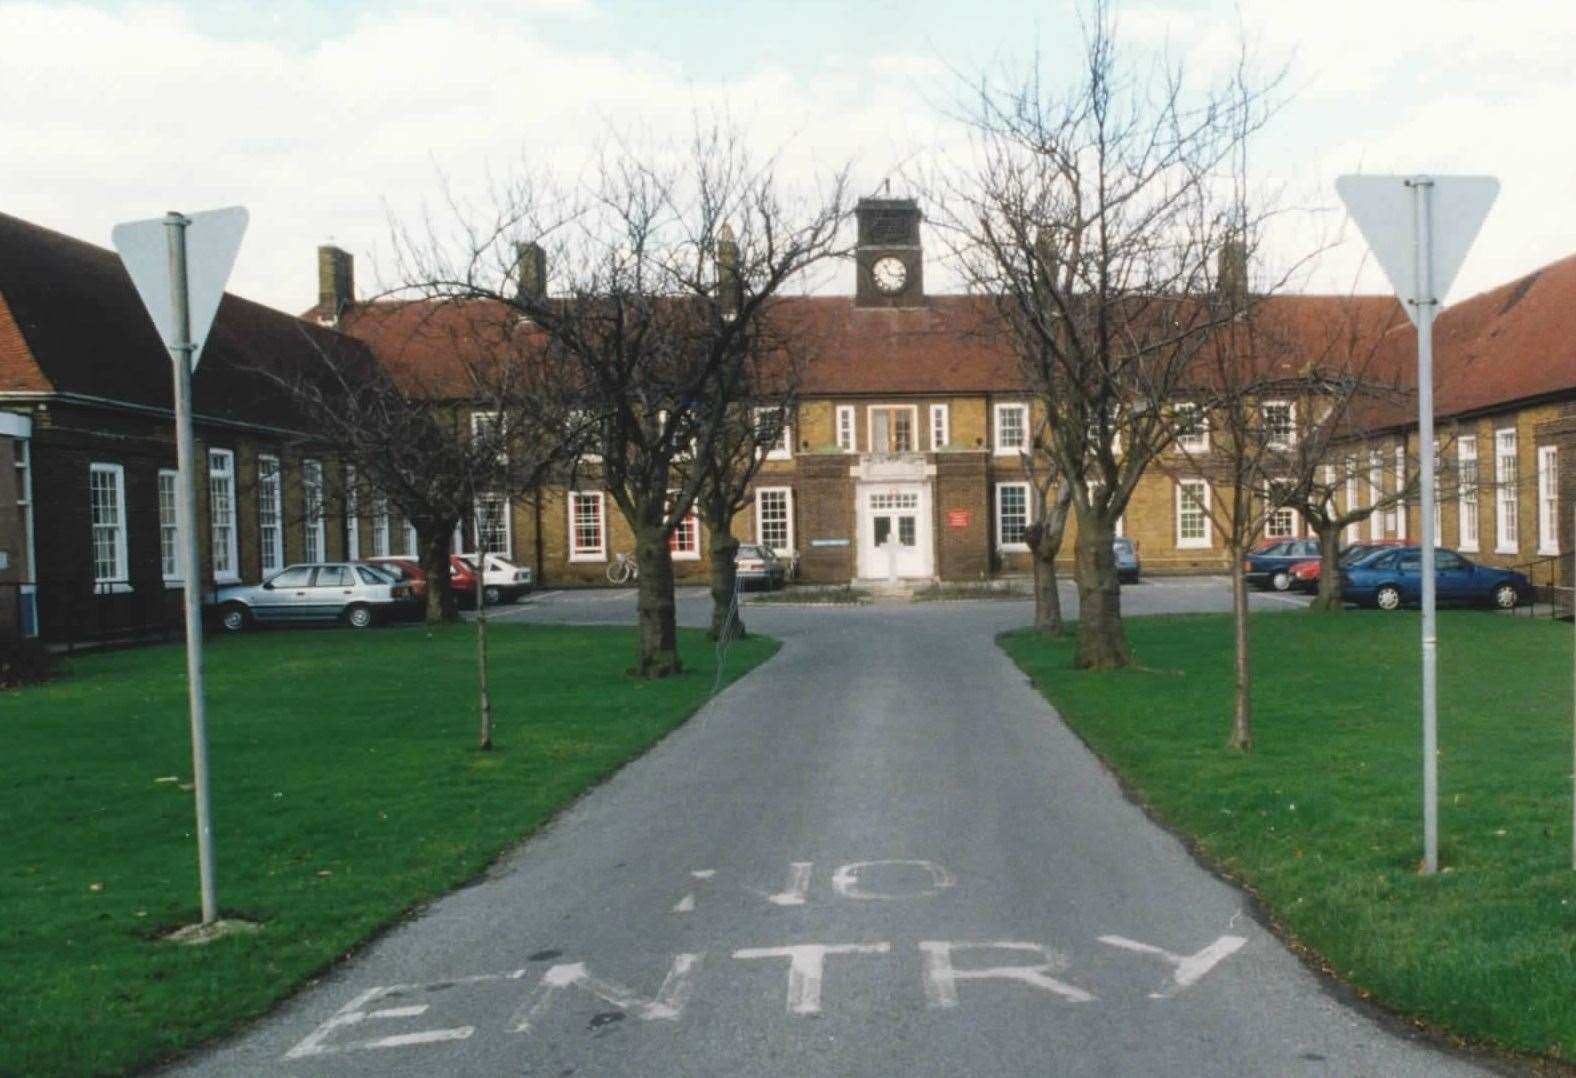 The blood-testing service was axed at Victoria Hospital in Deal